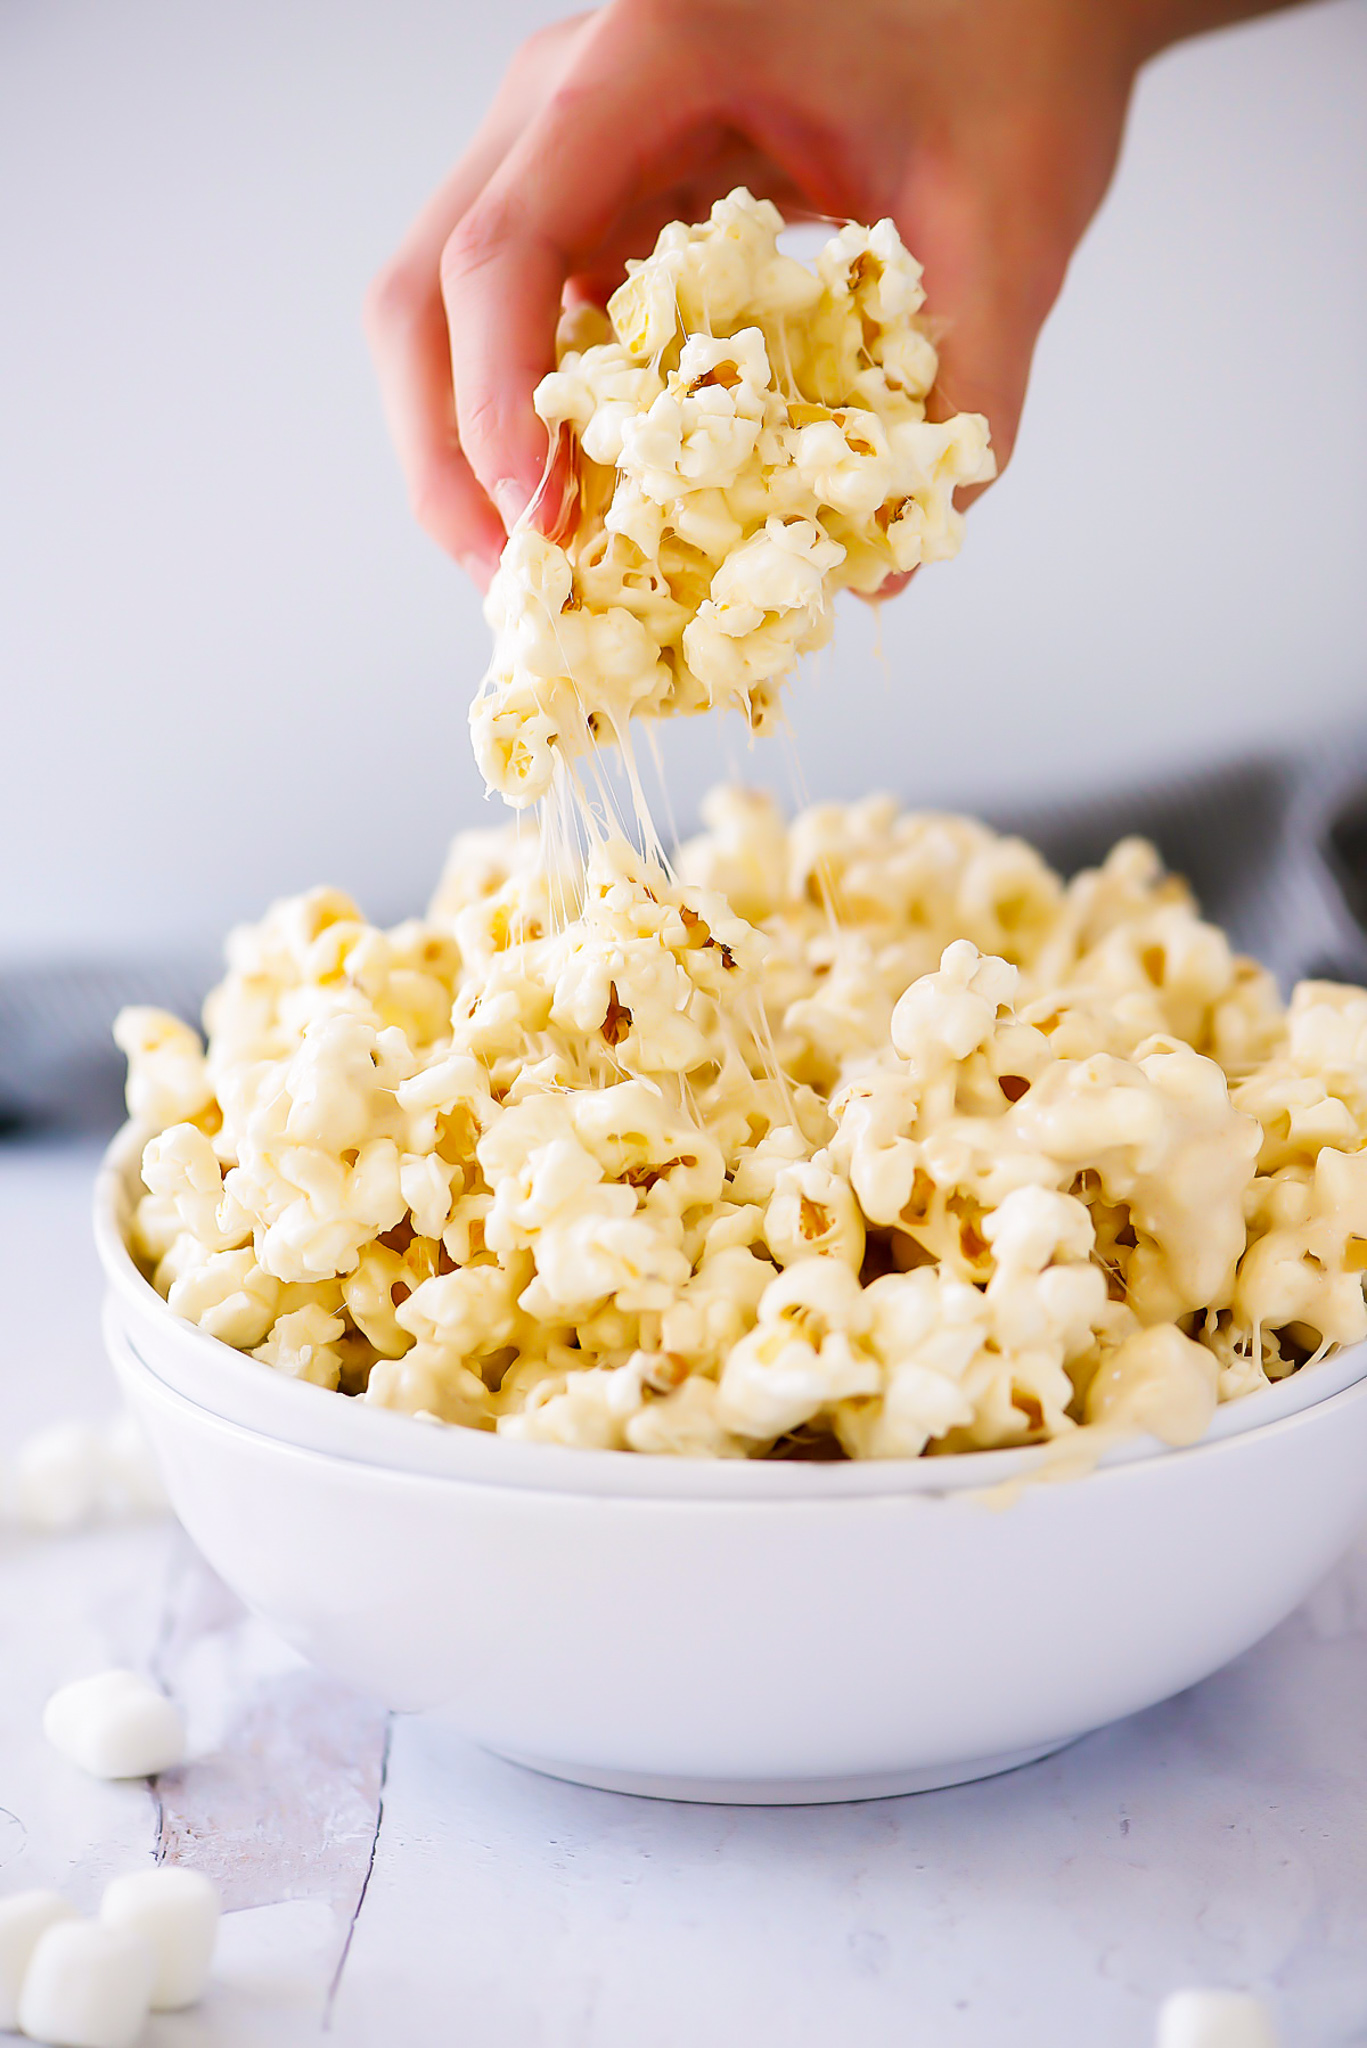 Popcorn smothered in a marshmallow mixture.